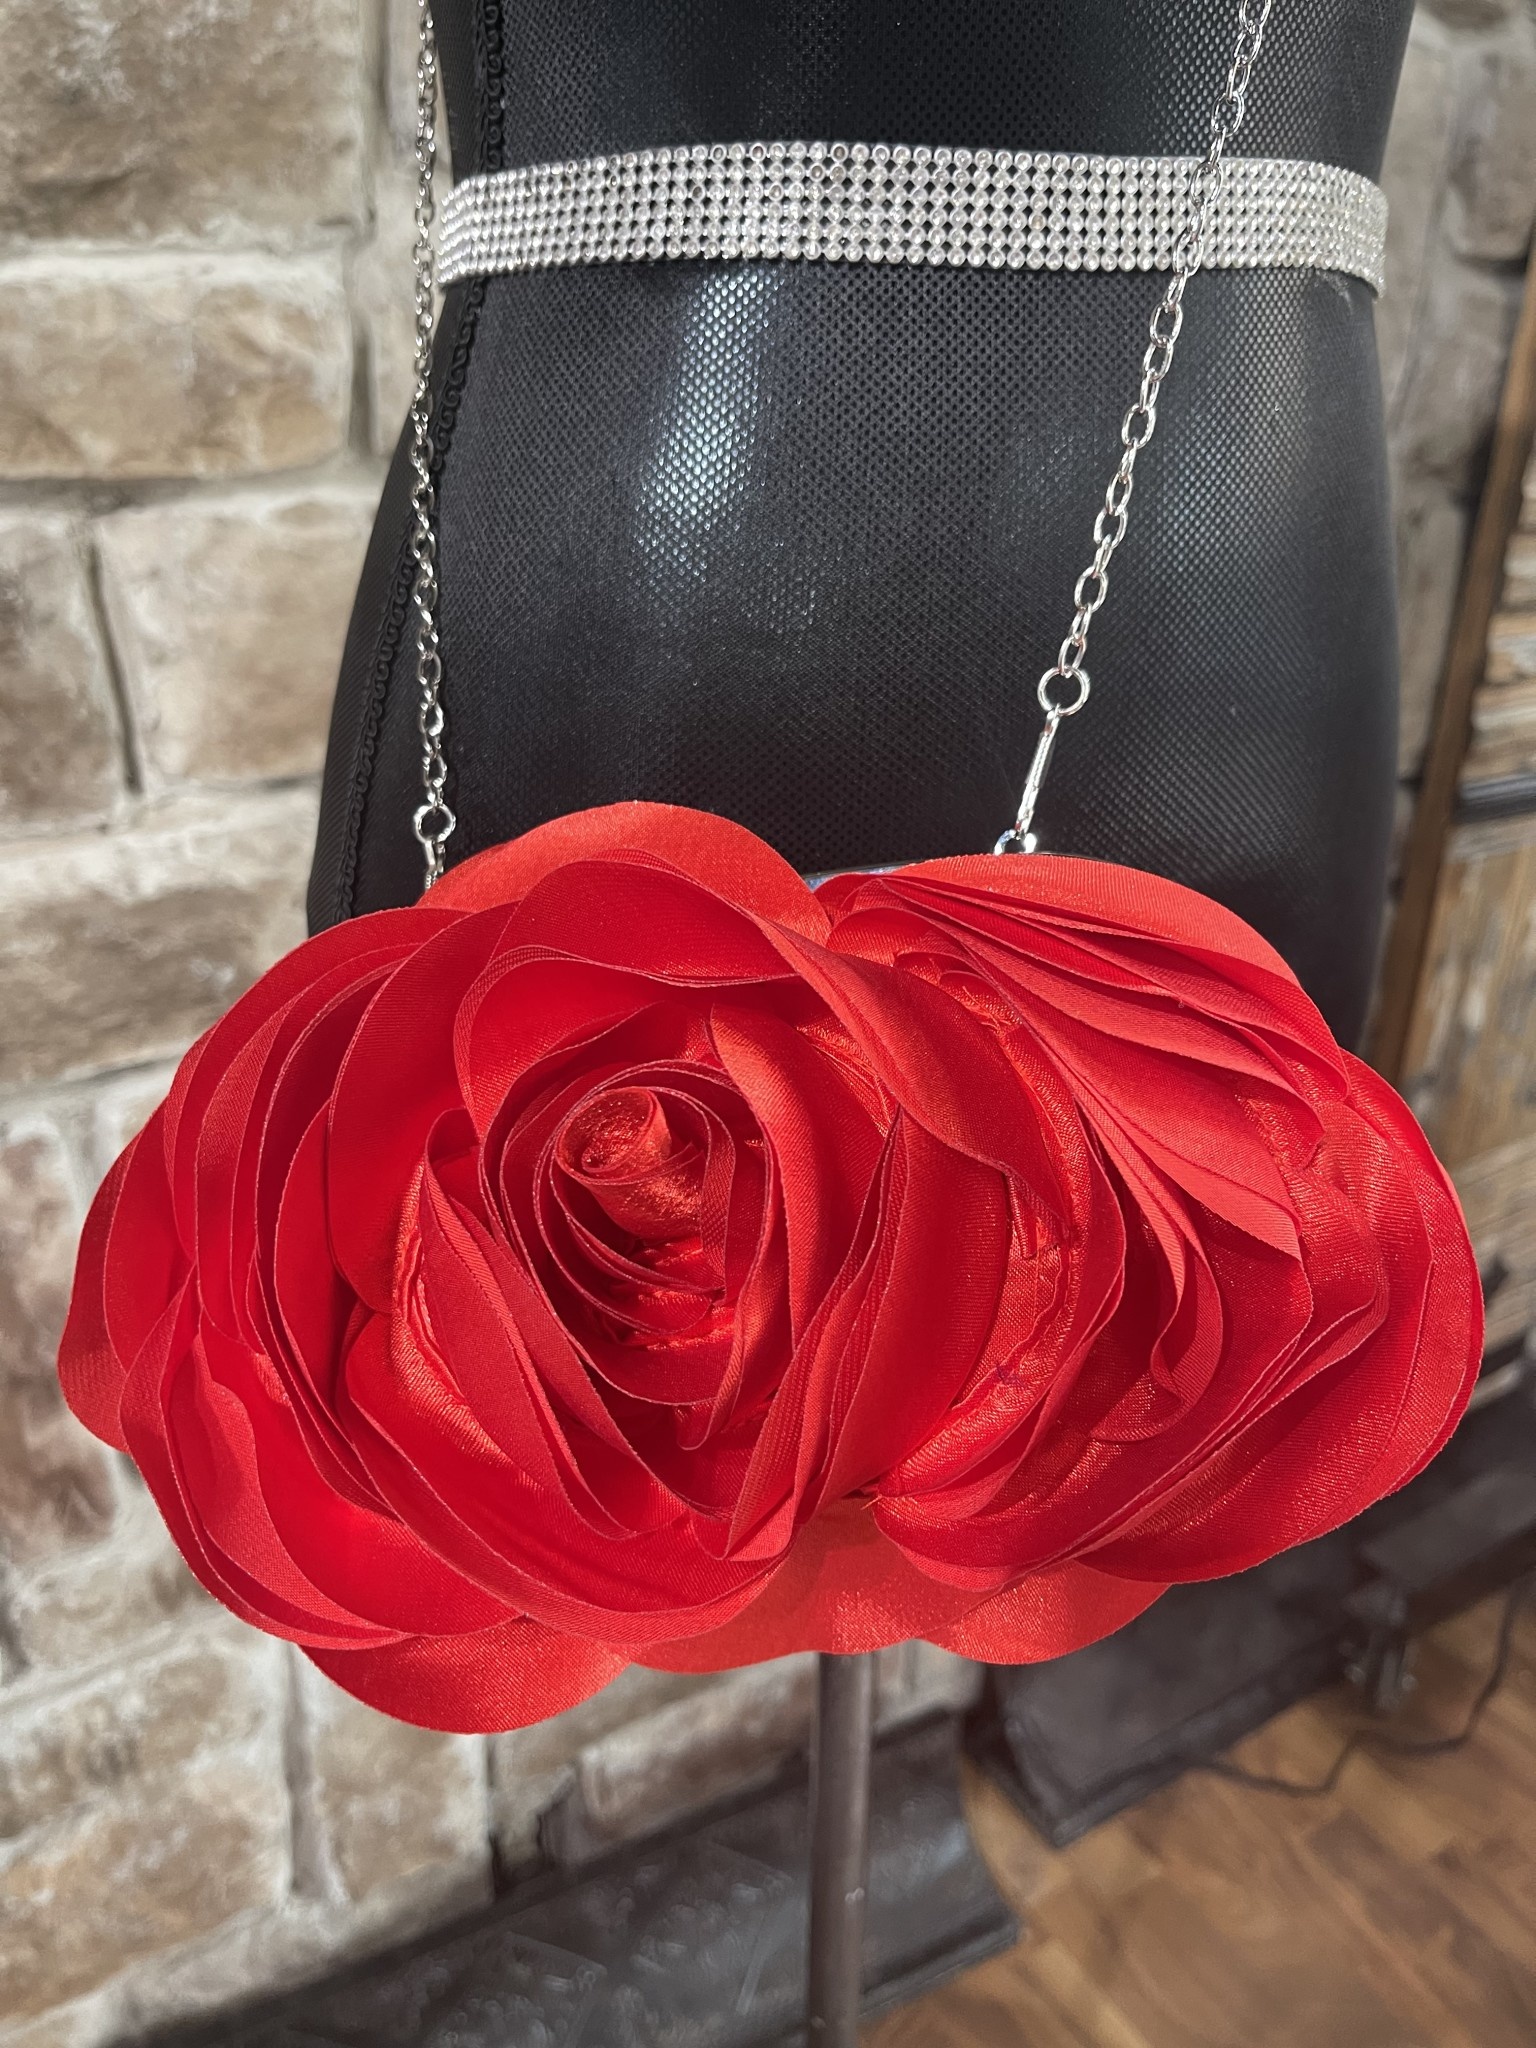 Red Roses Bag,leather Roses Bag,red Rose Purse,rose Lover Gift,designer Bag,red  Roses Purse,leather Gift,best Gift,gift for Her,elegant Bag - Etsy